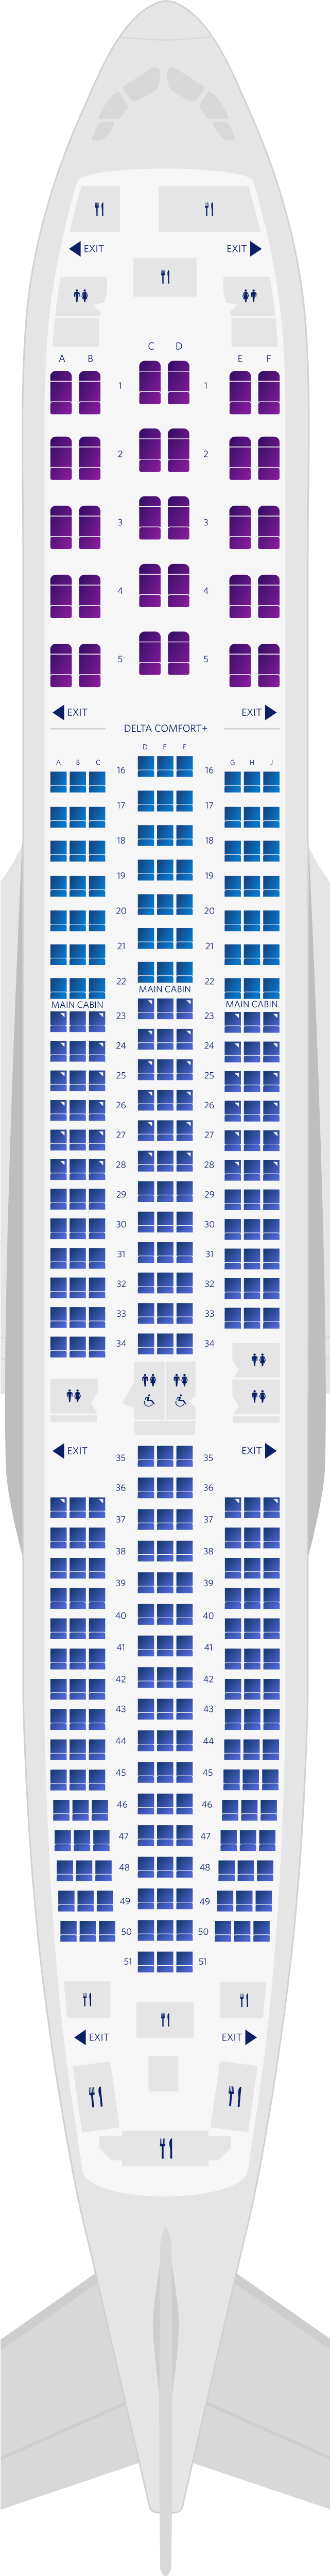 Airbus A350-900 3-Cabin Seat Map